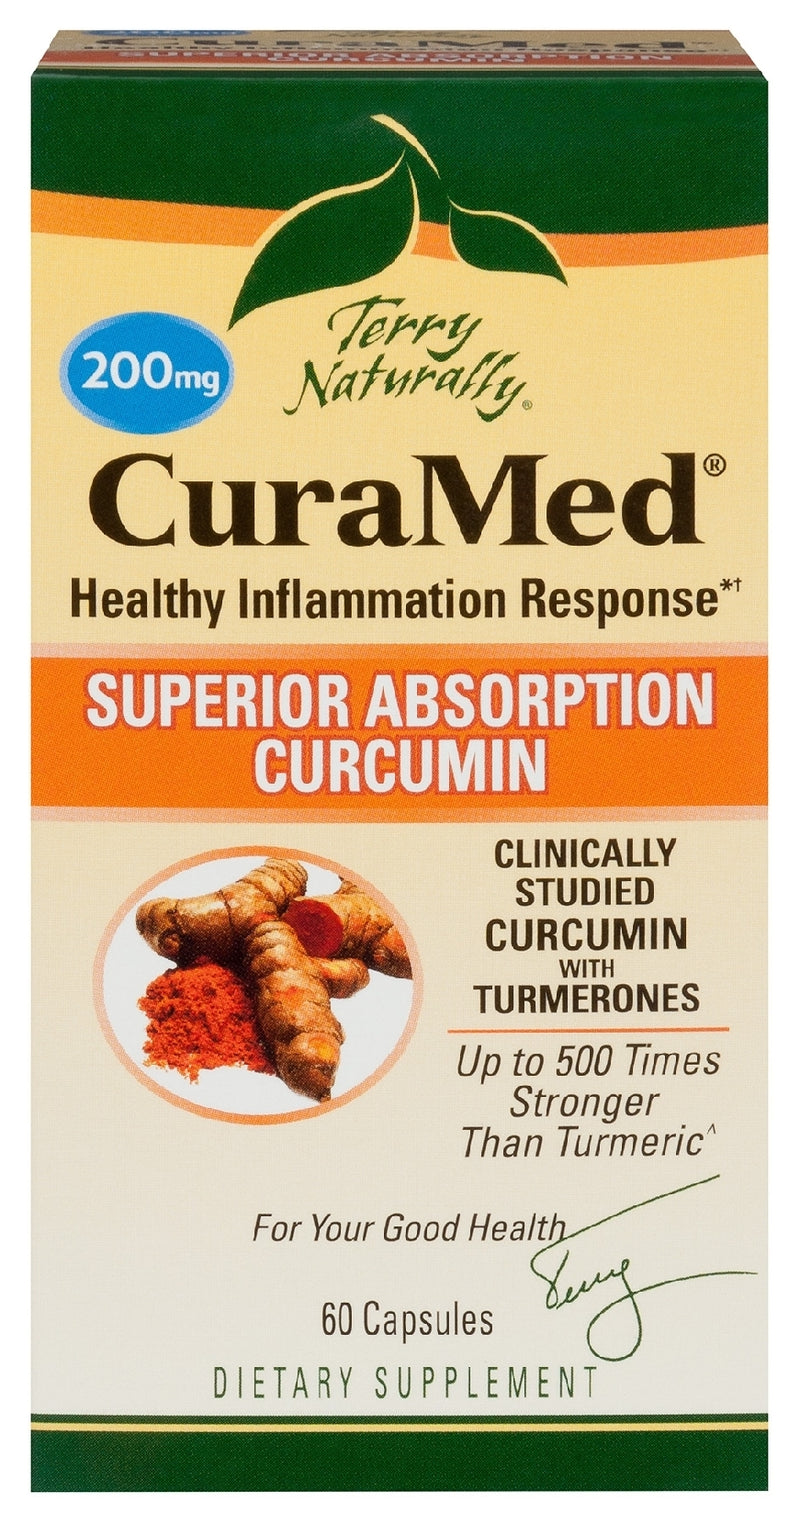 Terry Naturally CuraMed 200 mg 60 Capsules